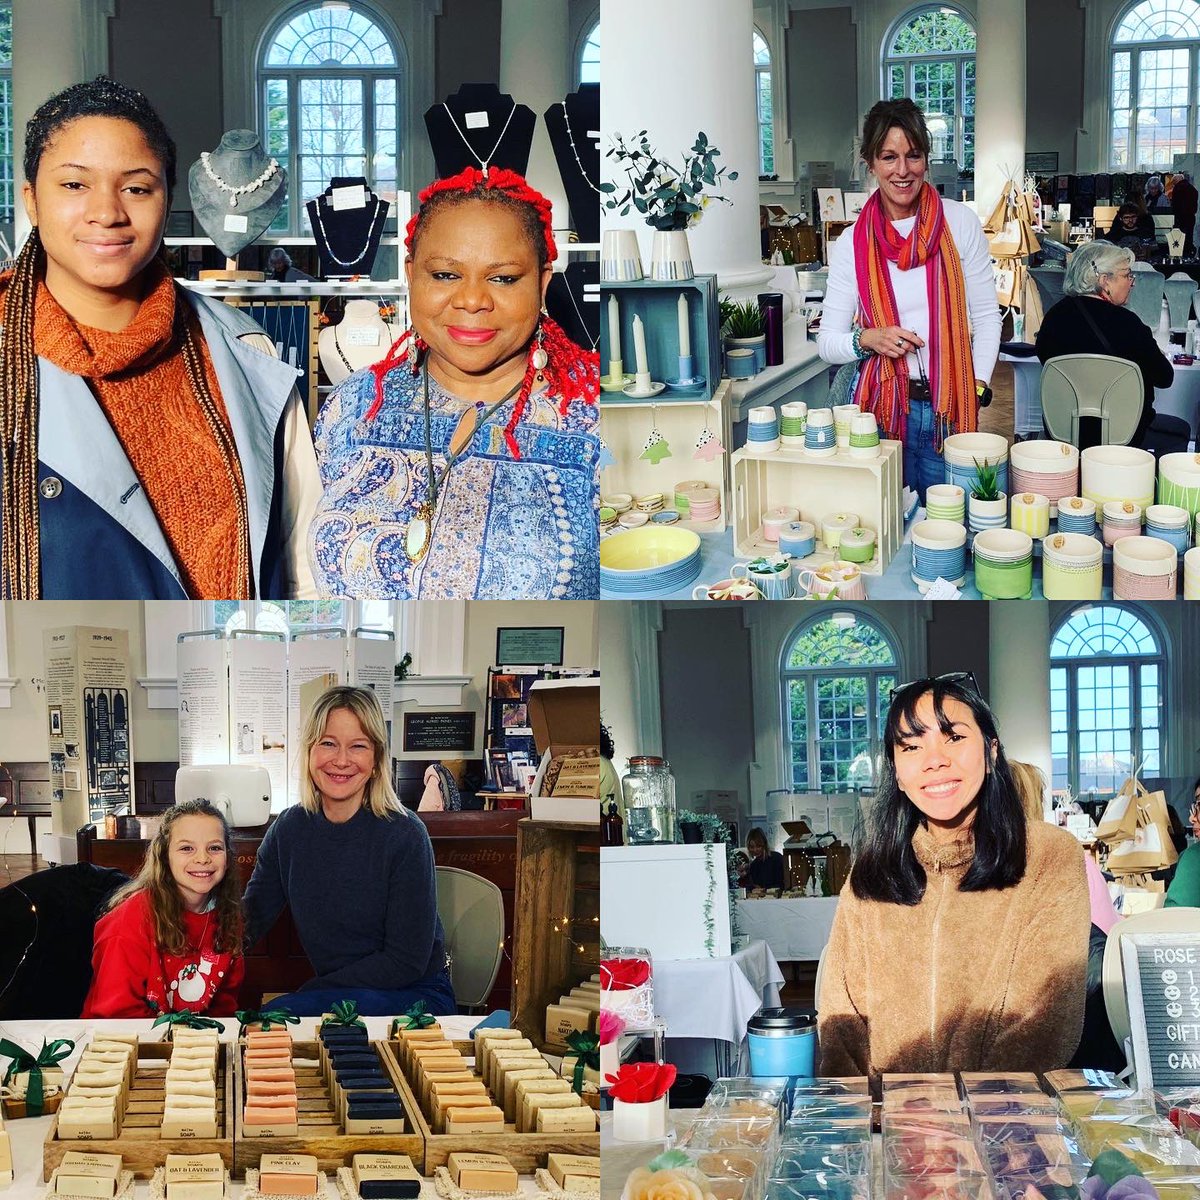 Season’s Greetings from the talented creative makers at our pop up festive market today. (Saturday 23rd December) Last chance to get a unique handmade gift. We are open until 4pm. Pop in for a mulled wine and a mince pie too.